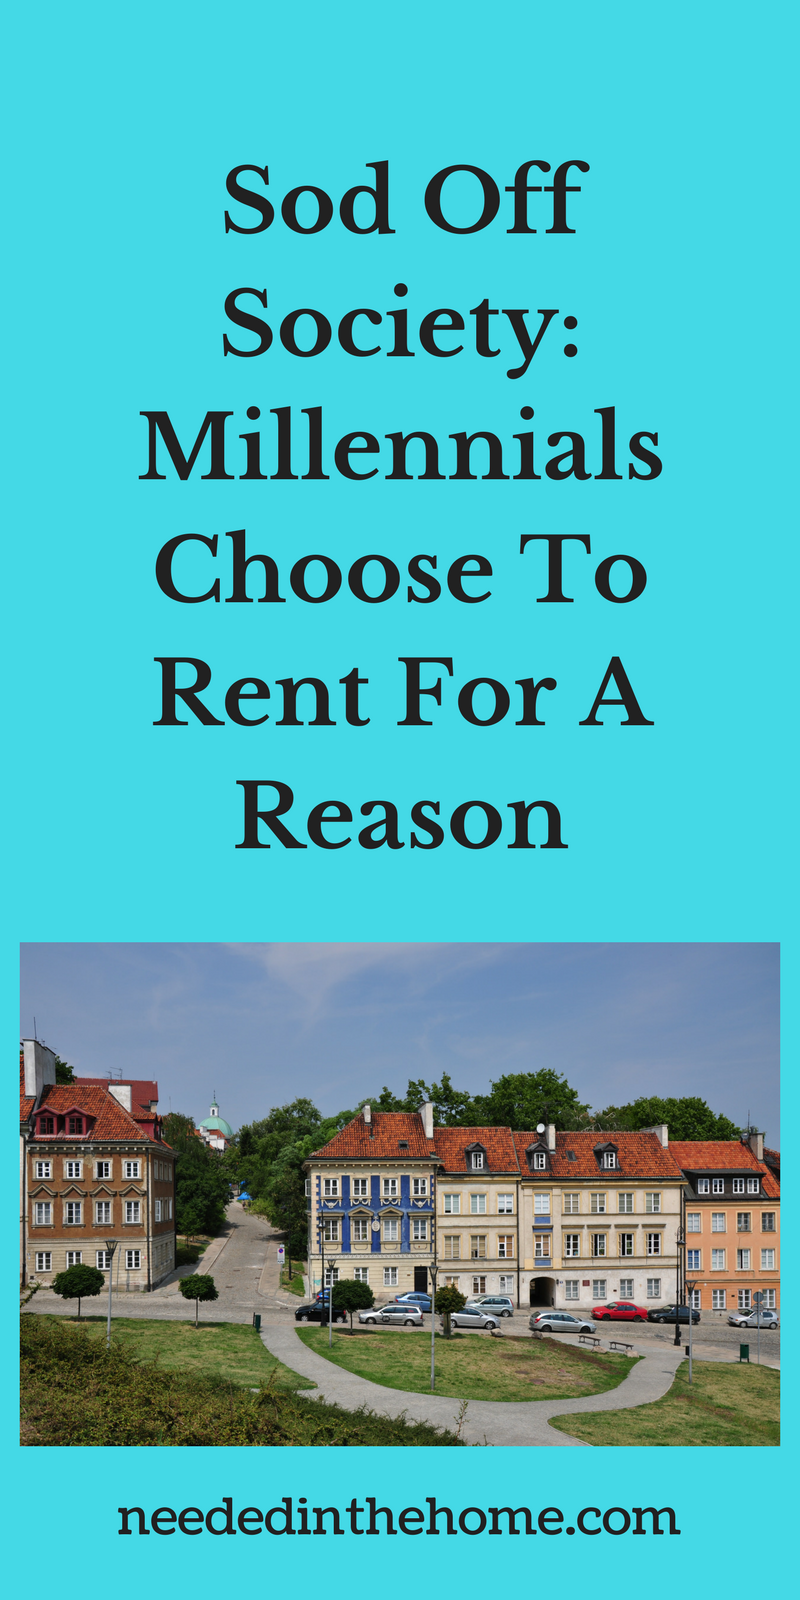 townhouses to rent with street parking Sod Off Society: Millennials Choose To Rent For A Reason